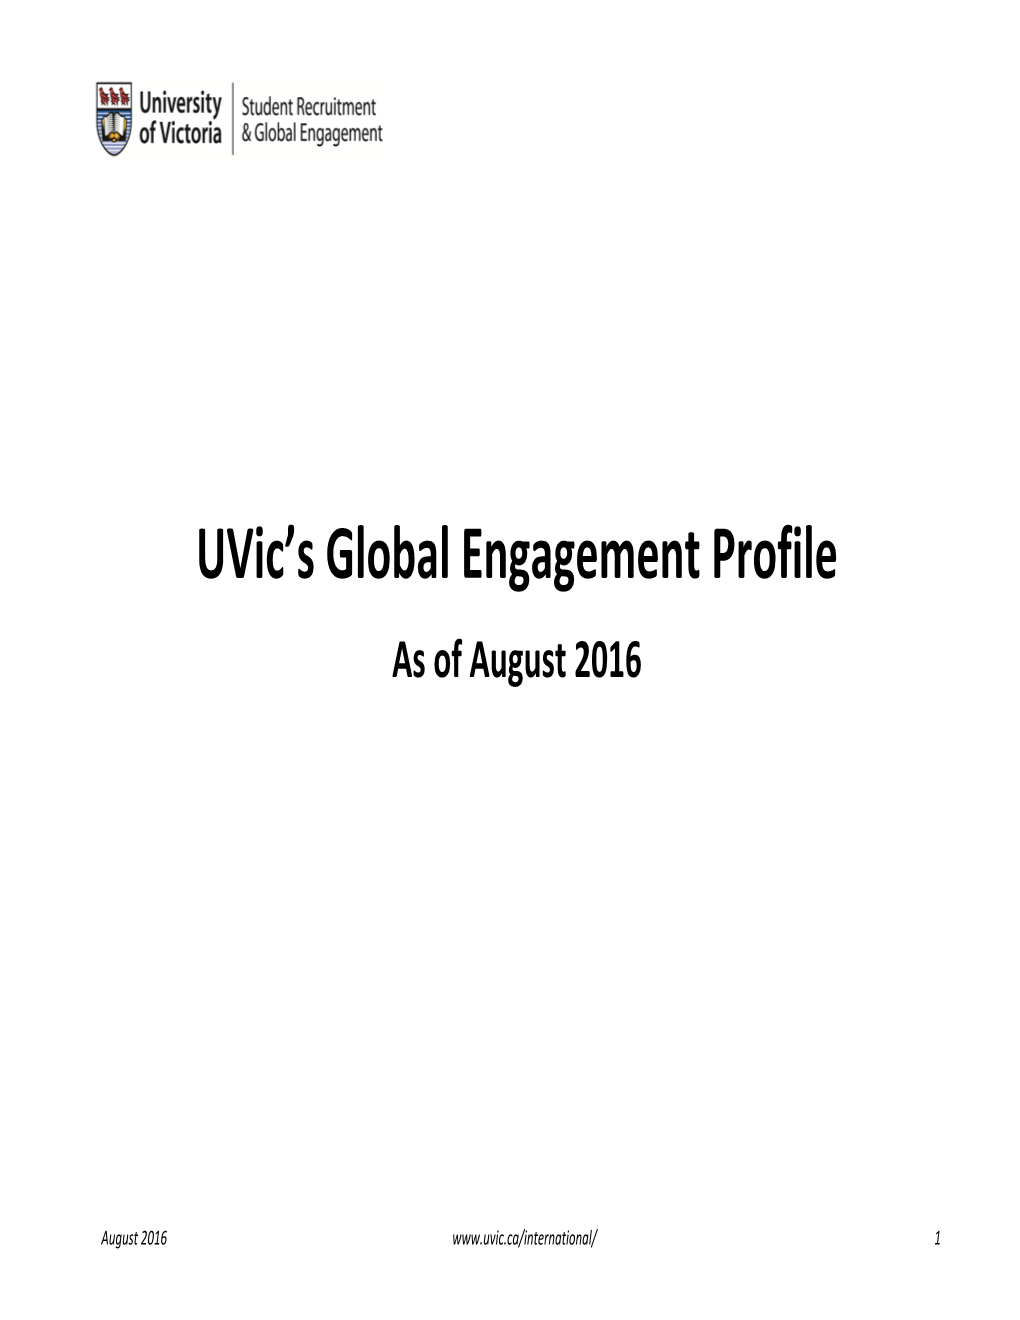 Uvic's Global Engagement Profile